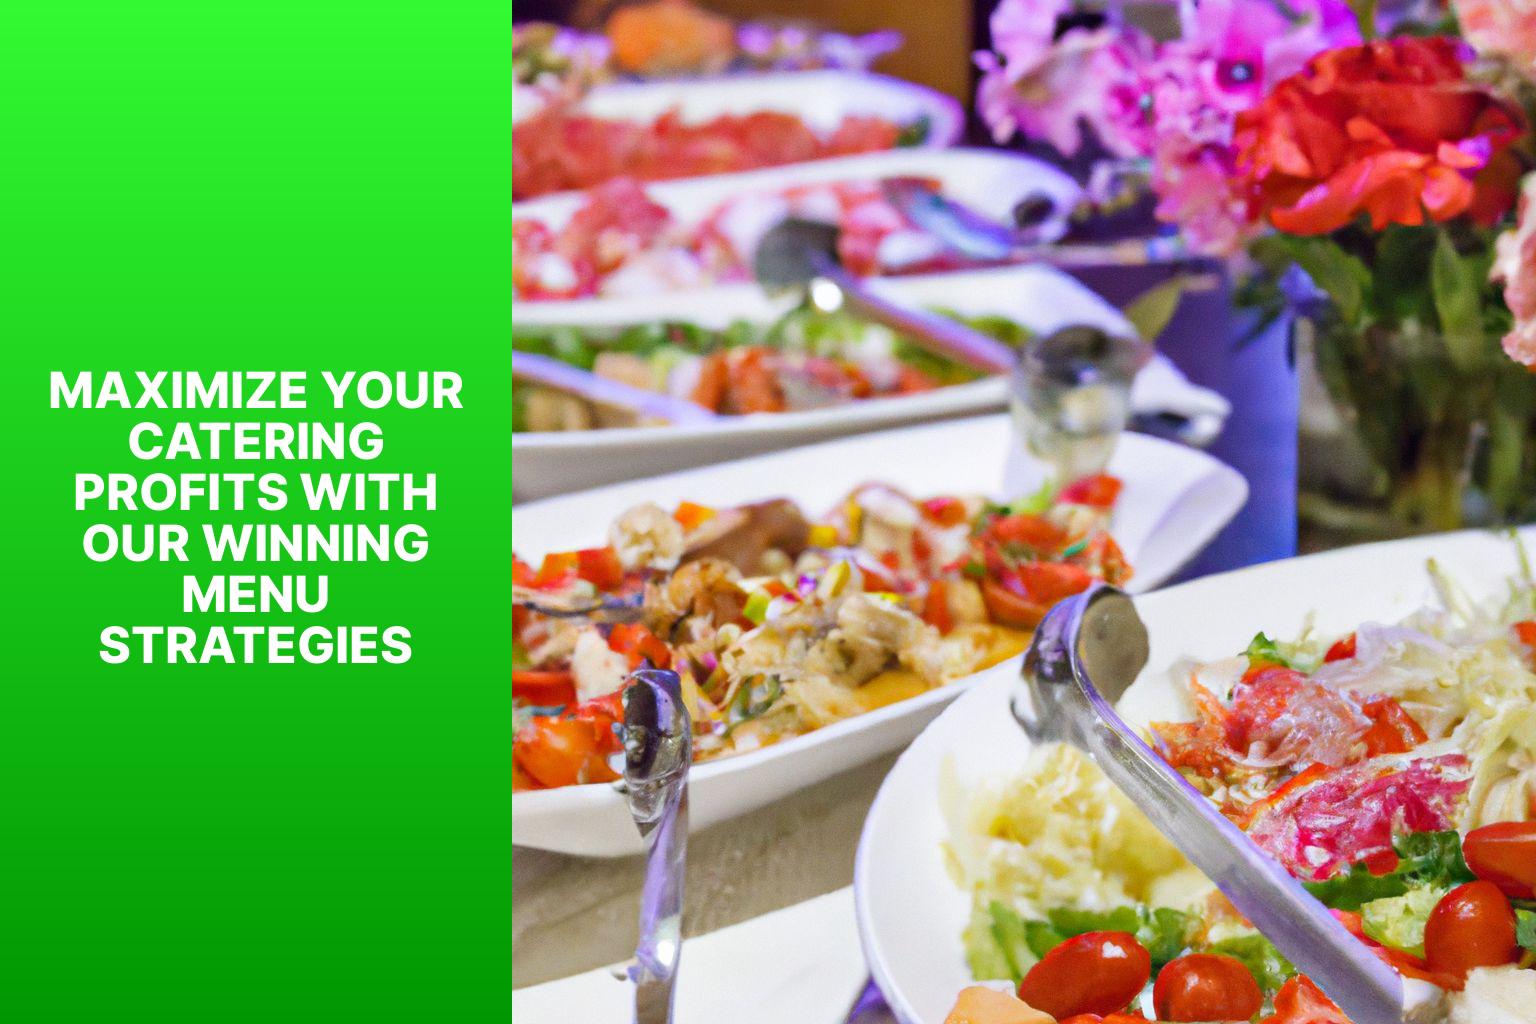 Maximize Your Catering Profits with Our Winning Menu Strategies